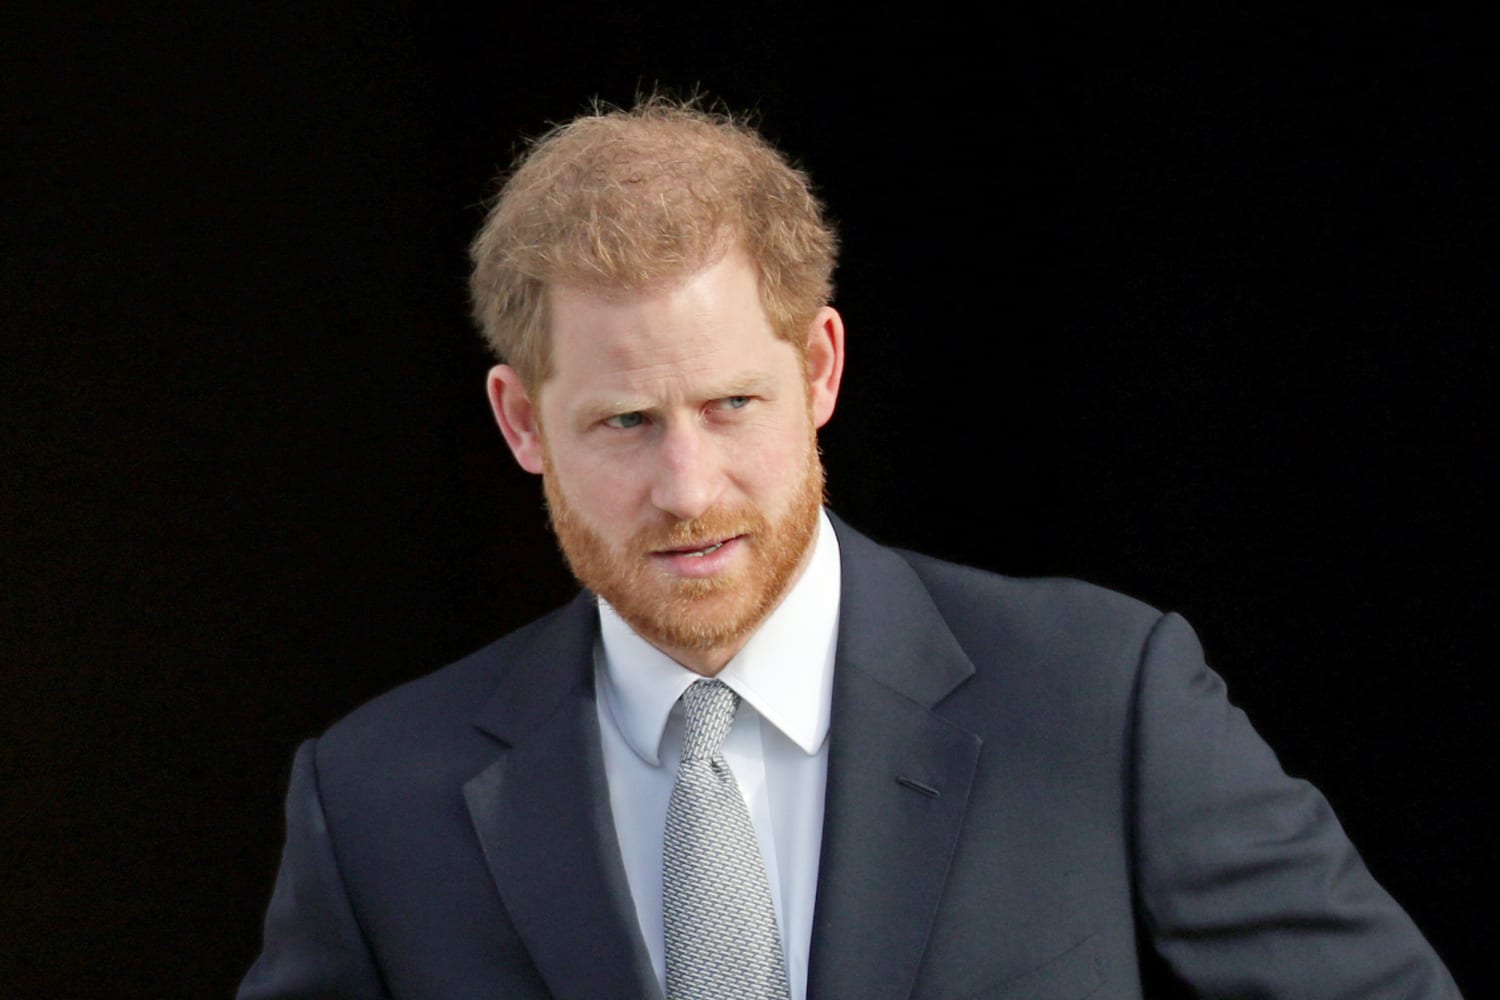 Prince Harry says he warned Twitter it was ‘allowing a coup to be staged’ before Jan. 6 Capitol riot